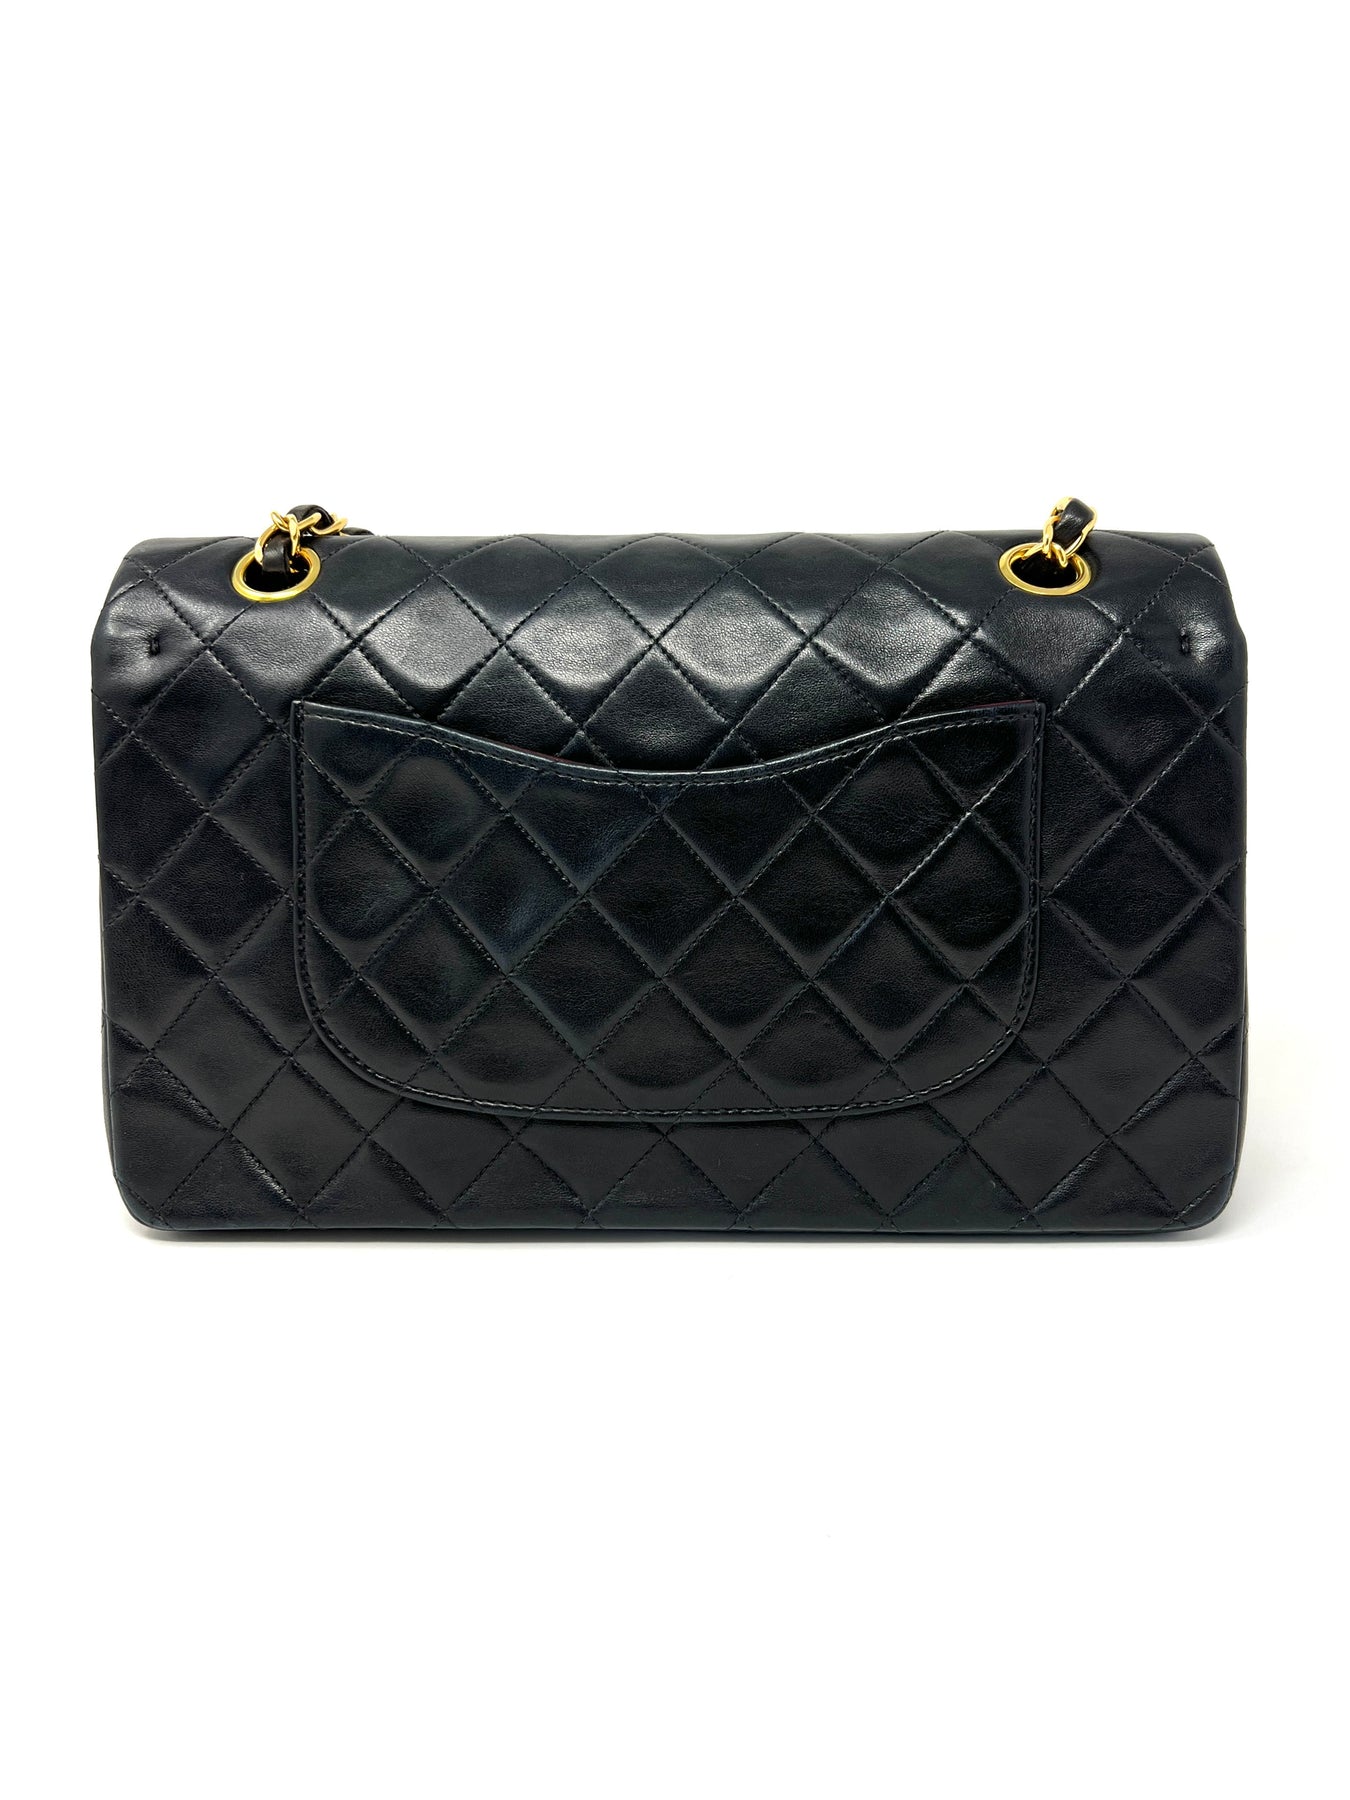 CHANEL Black Quilted Lambskin Vintage Square Mini Flap Bag For